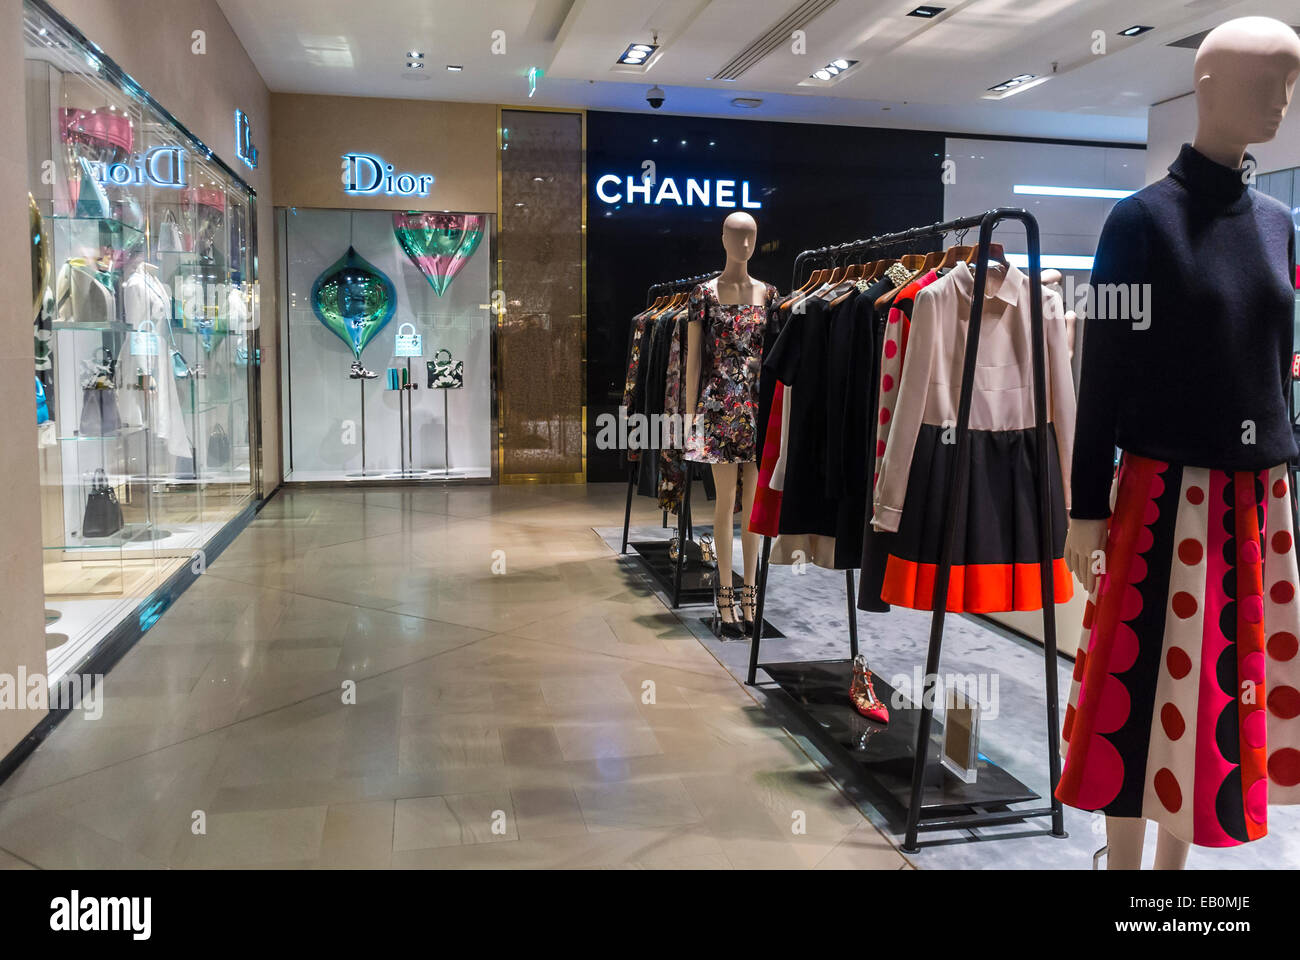 Paris, France, Clothing Display inside French Department Store, Galeries  Lafayettes, Christian Dior, Chanel Stores, mode labels Stock Photo - Alamy